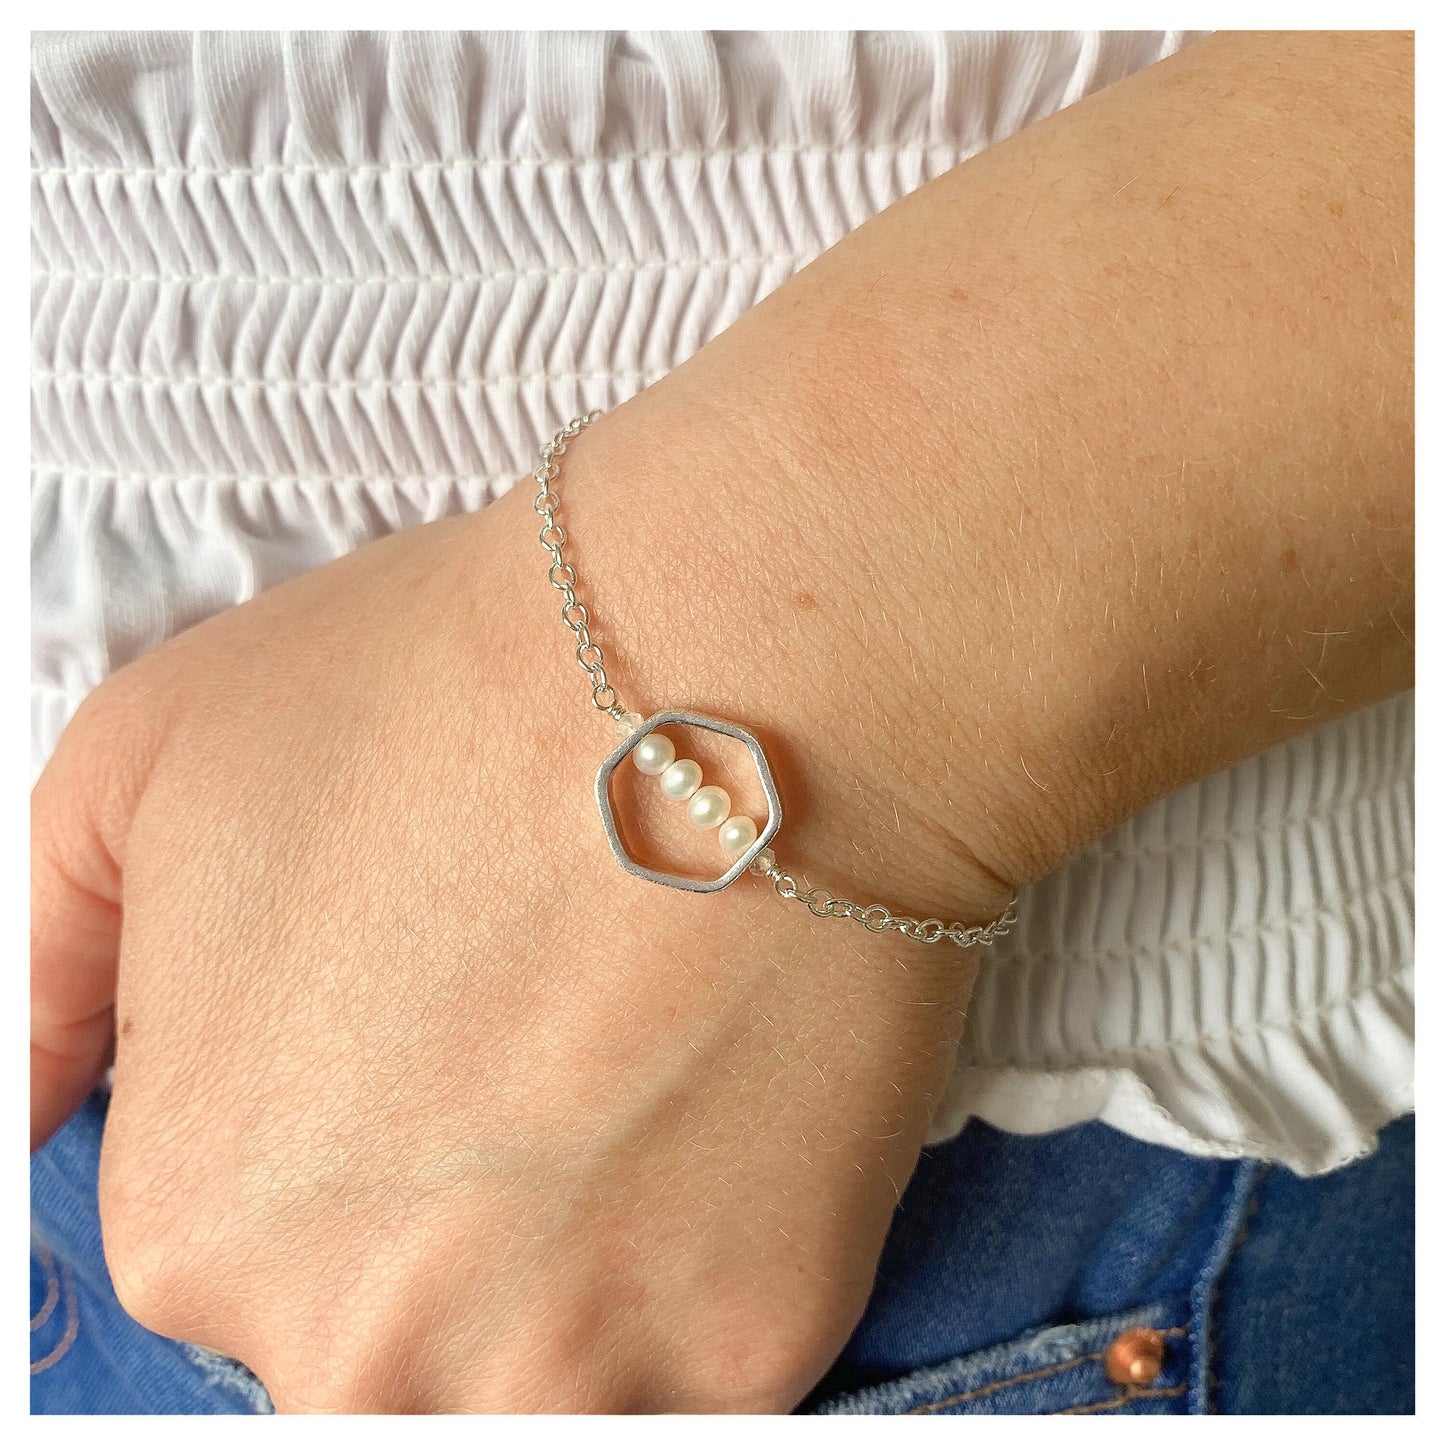 Sterling Silver, Freshwater Pearl and Moonstone Textured Hexagonal Bracelet.